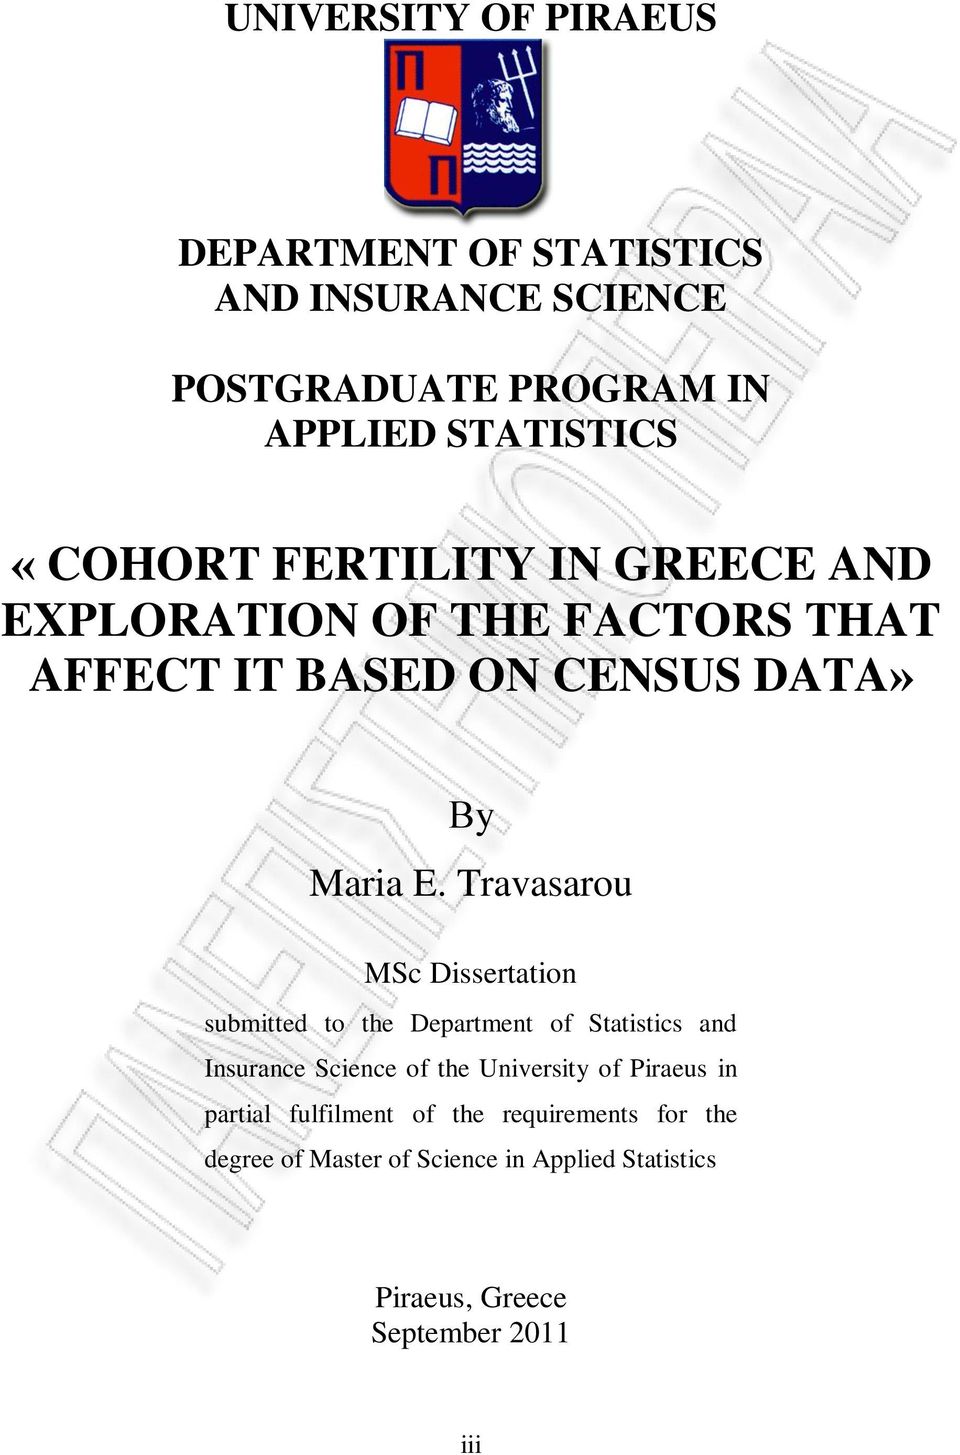 Travasarou MSc Dissertation submitted to the Department of Statistics and Insurance Science of the University of